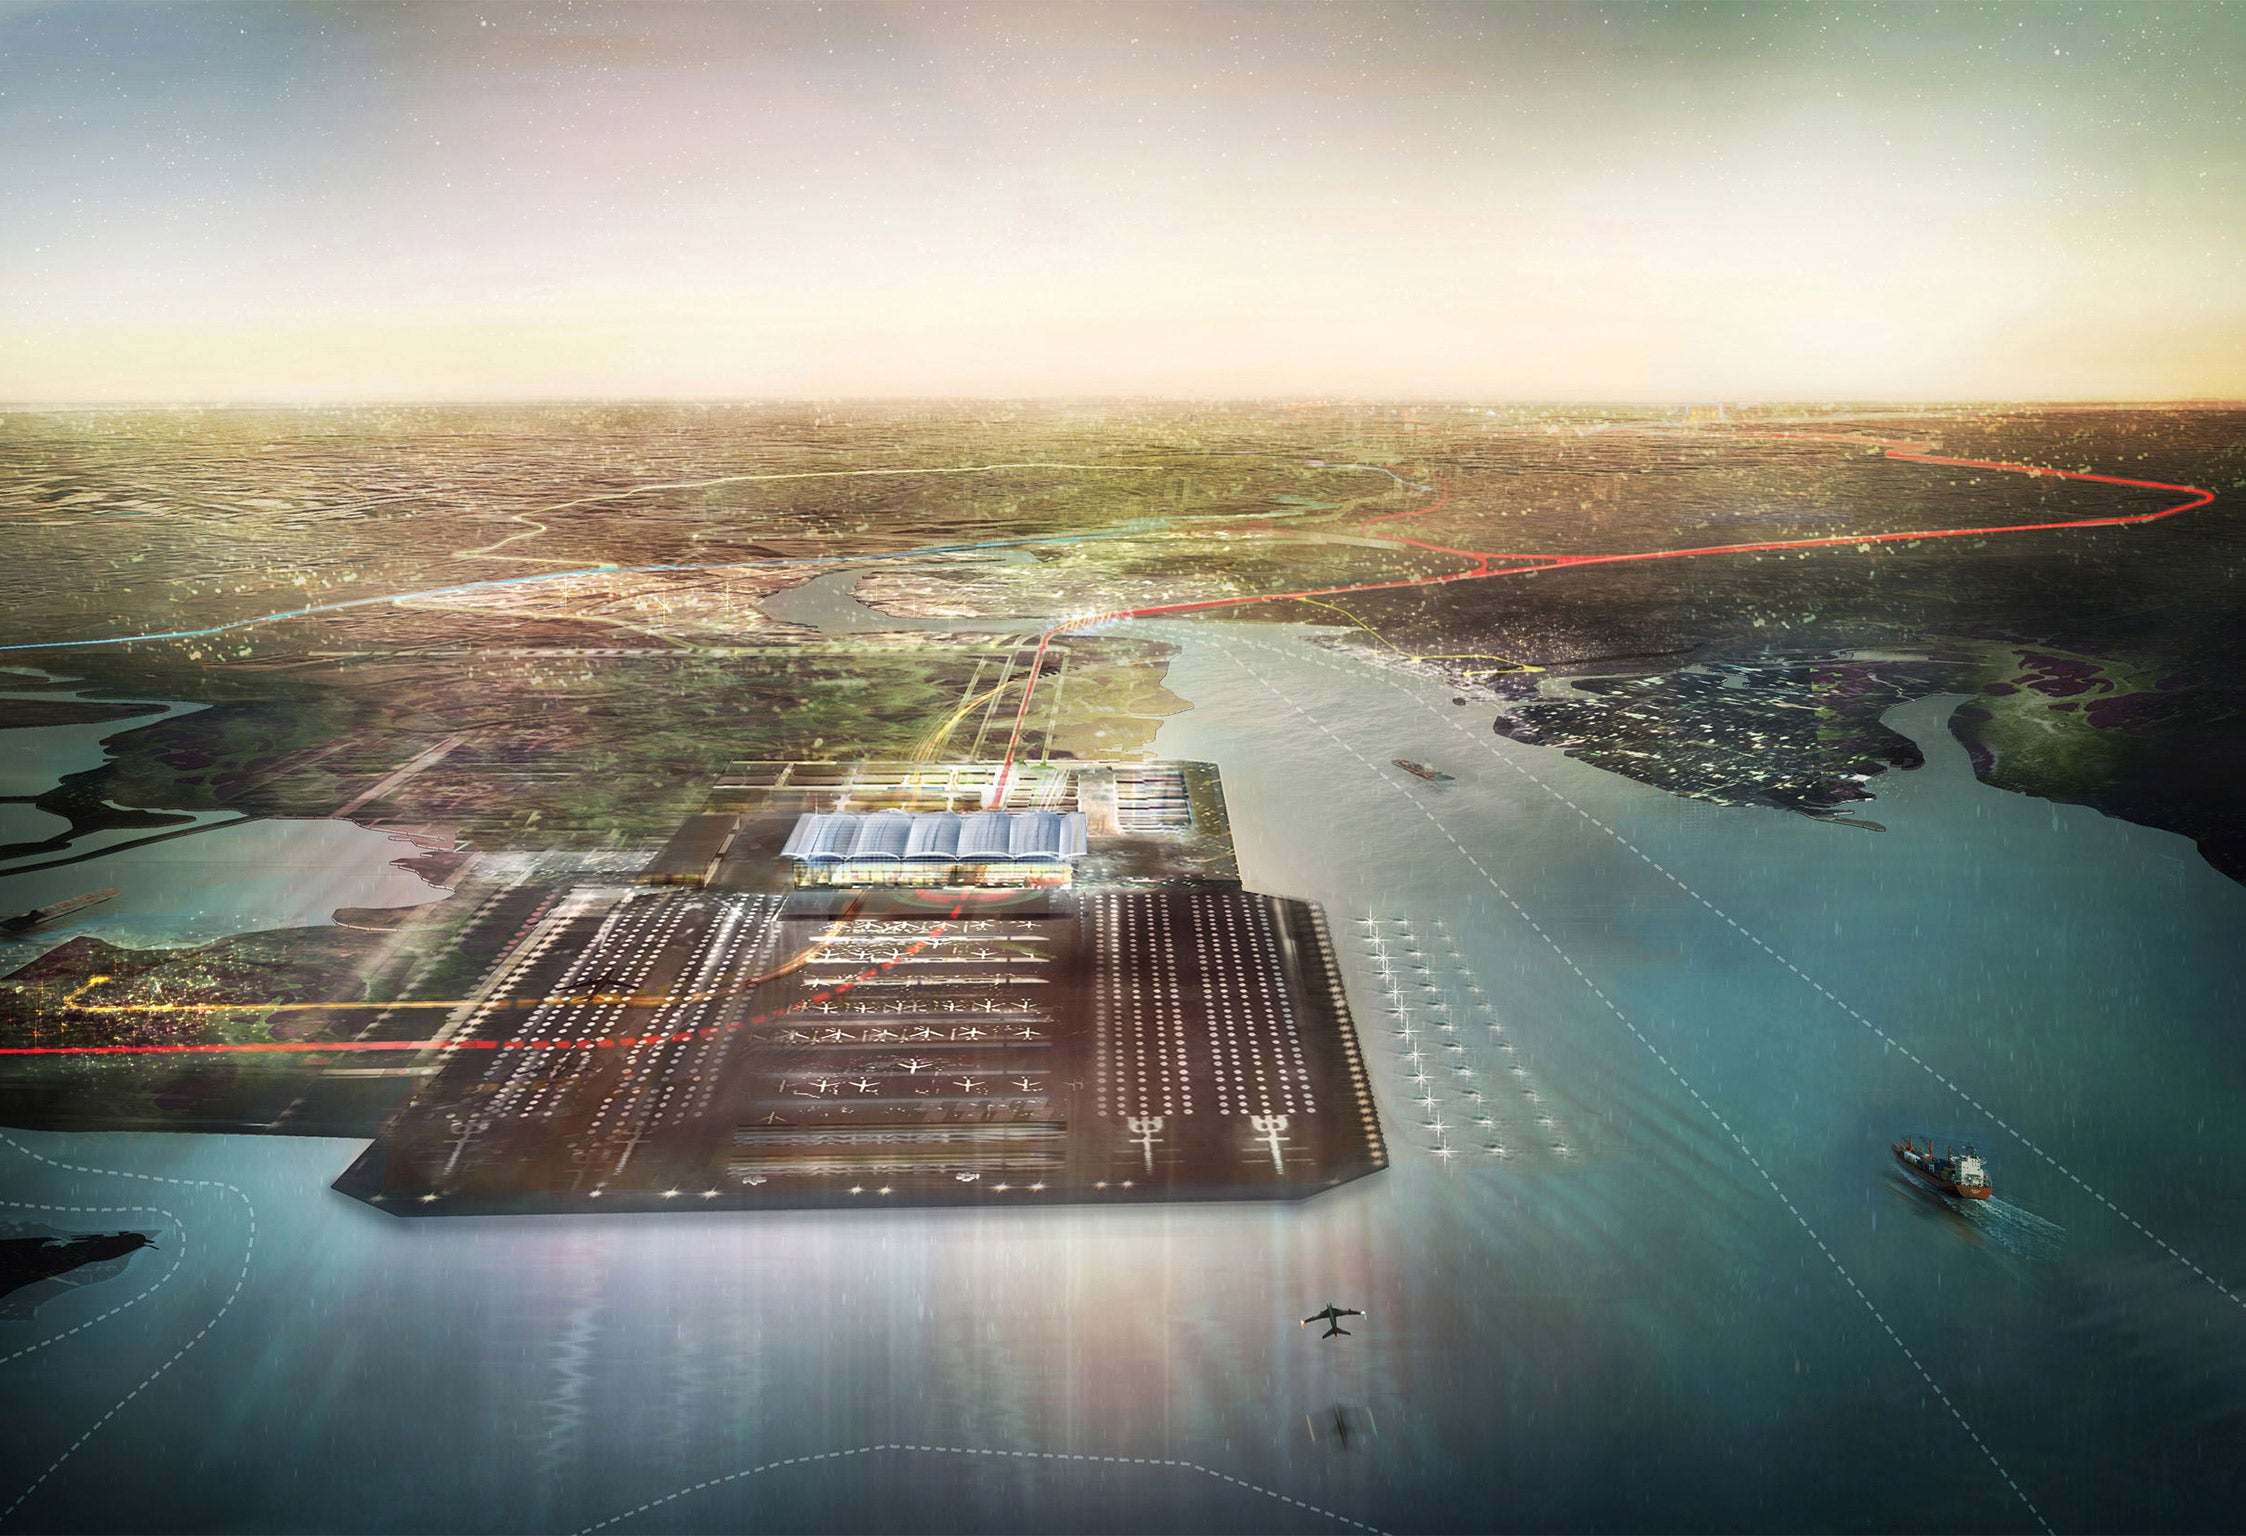 How a four-runway airport at the Thames Estuary may look